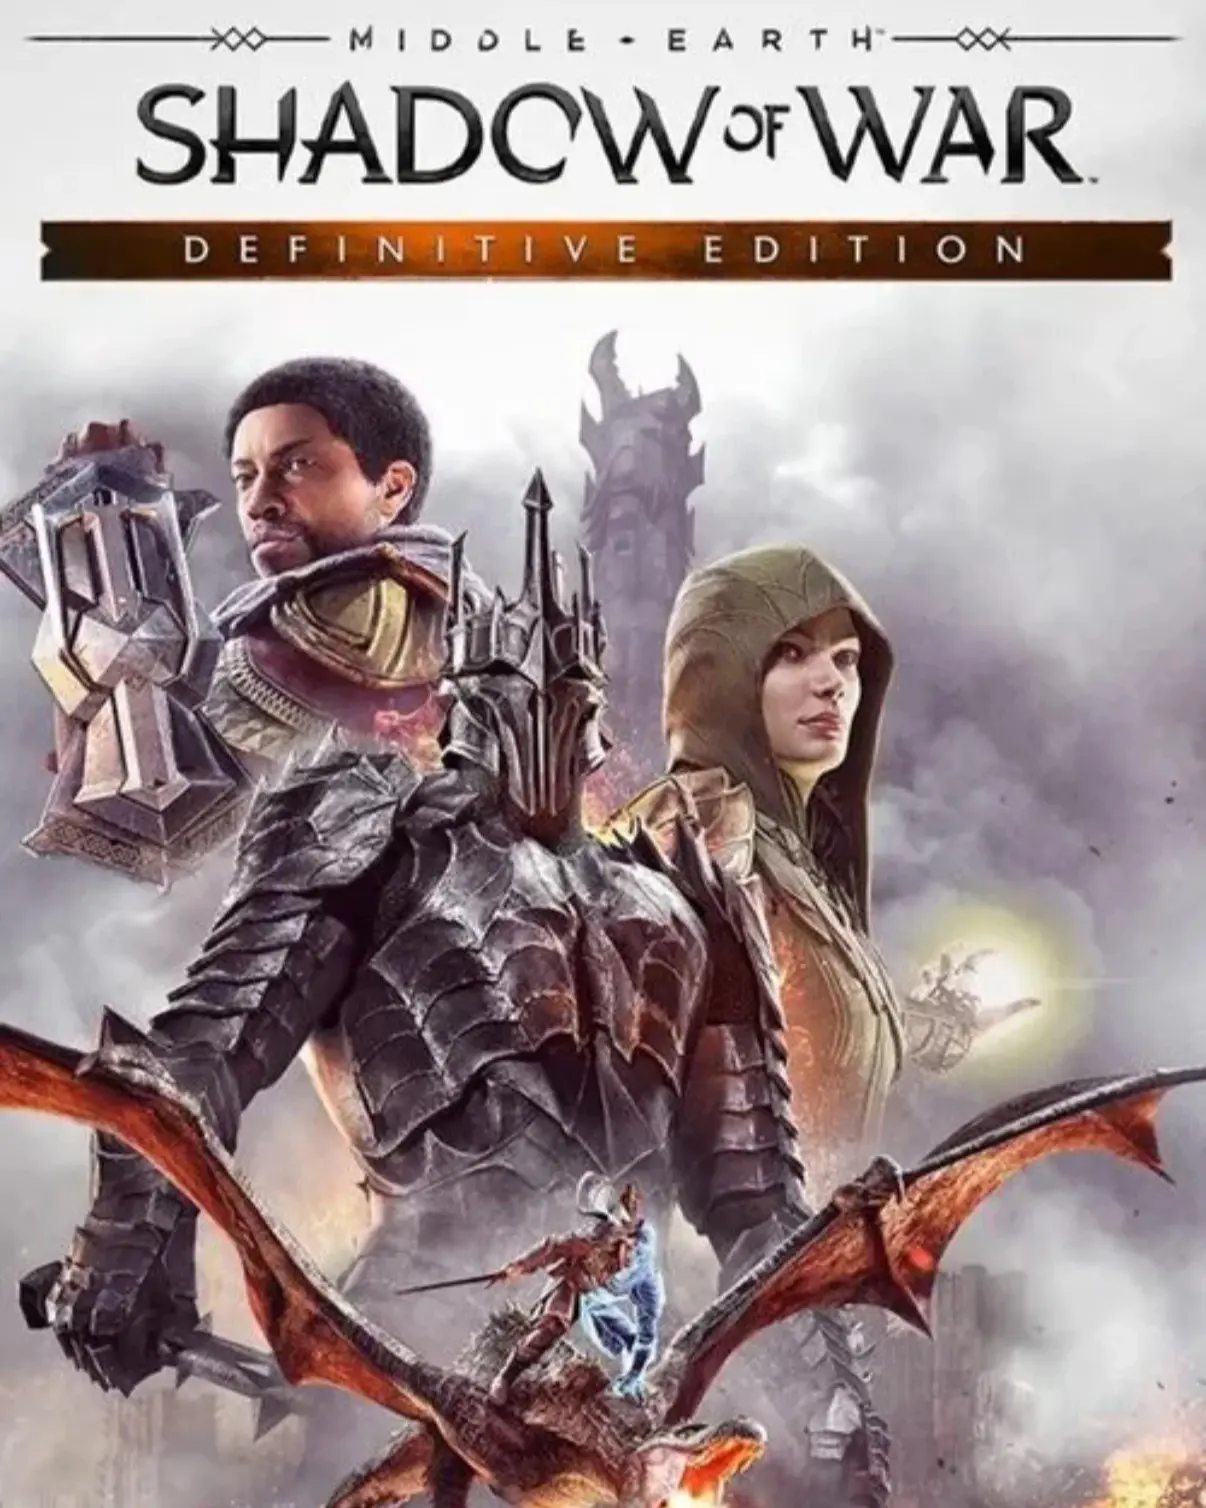 Middle-earth: Shadow of War Definitive Edition (AR) (Xbox One / Xbox Series X|S) - Xbox Live - Digital Code